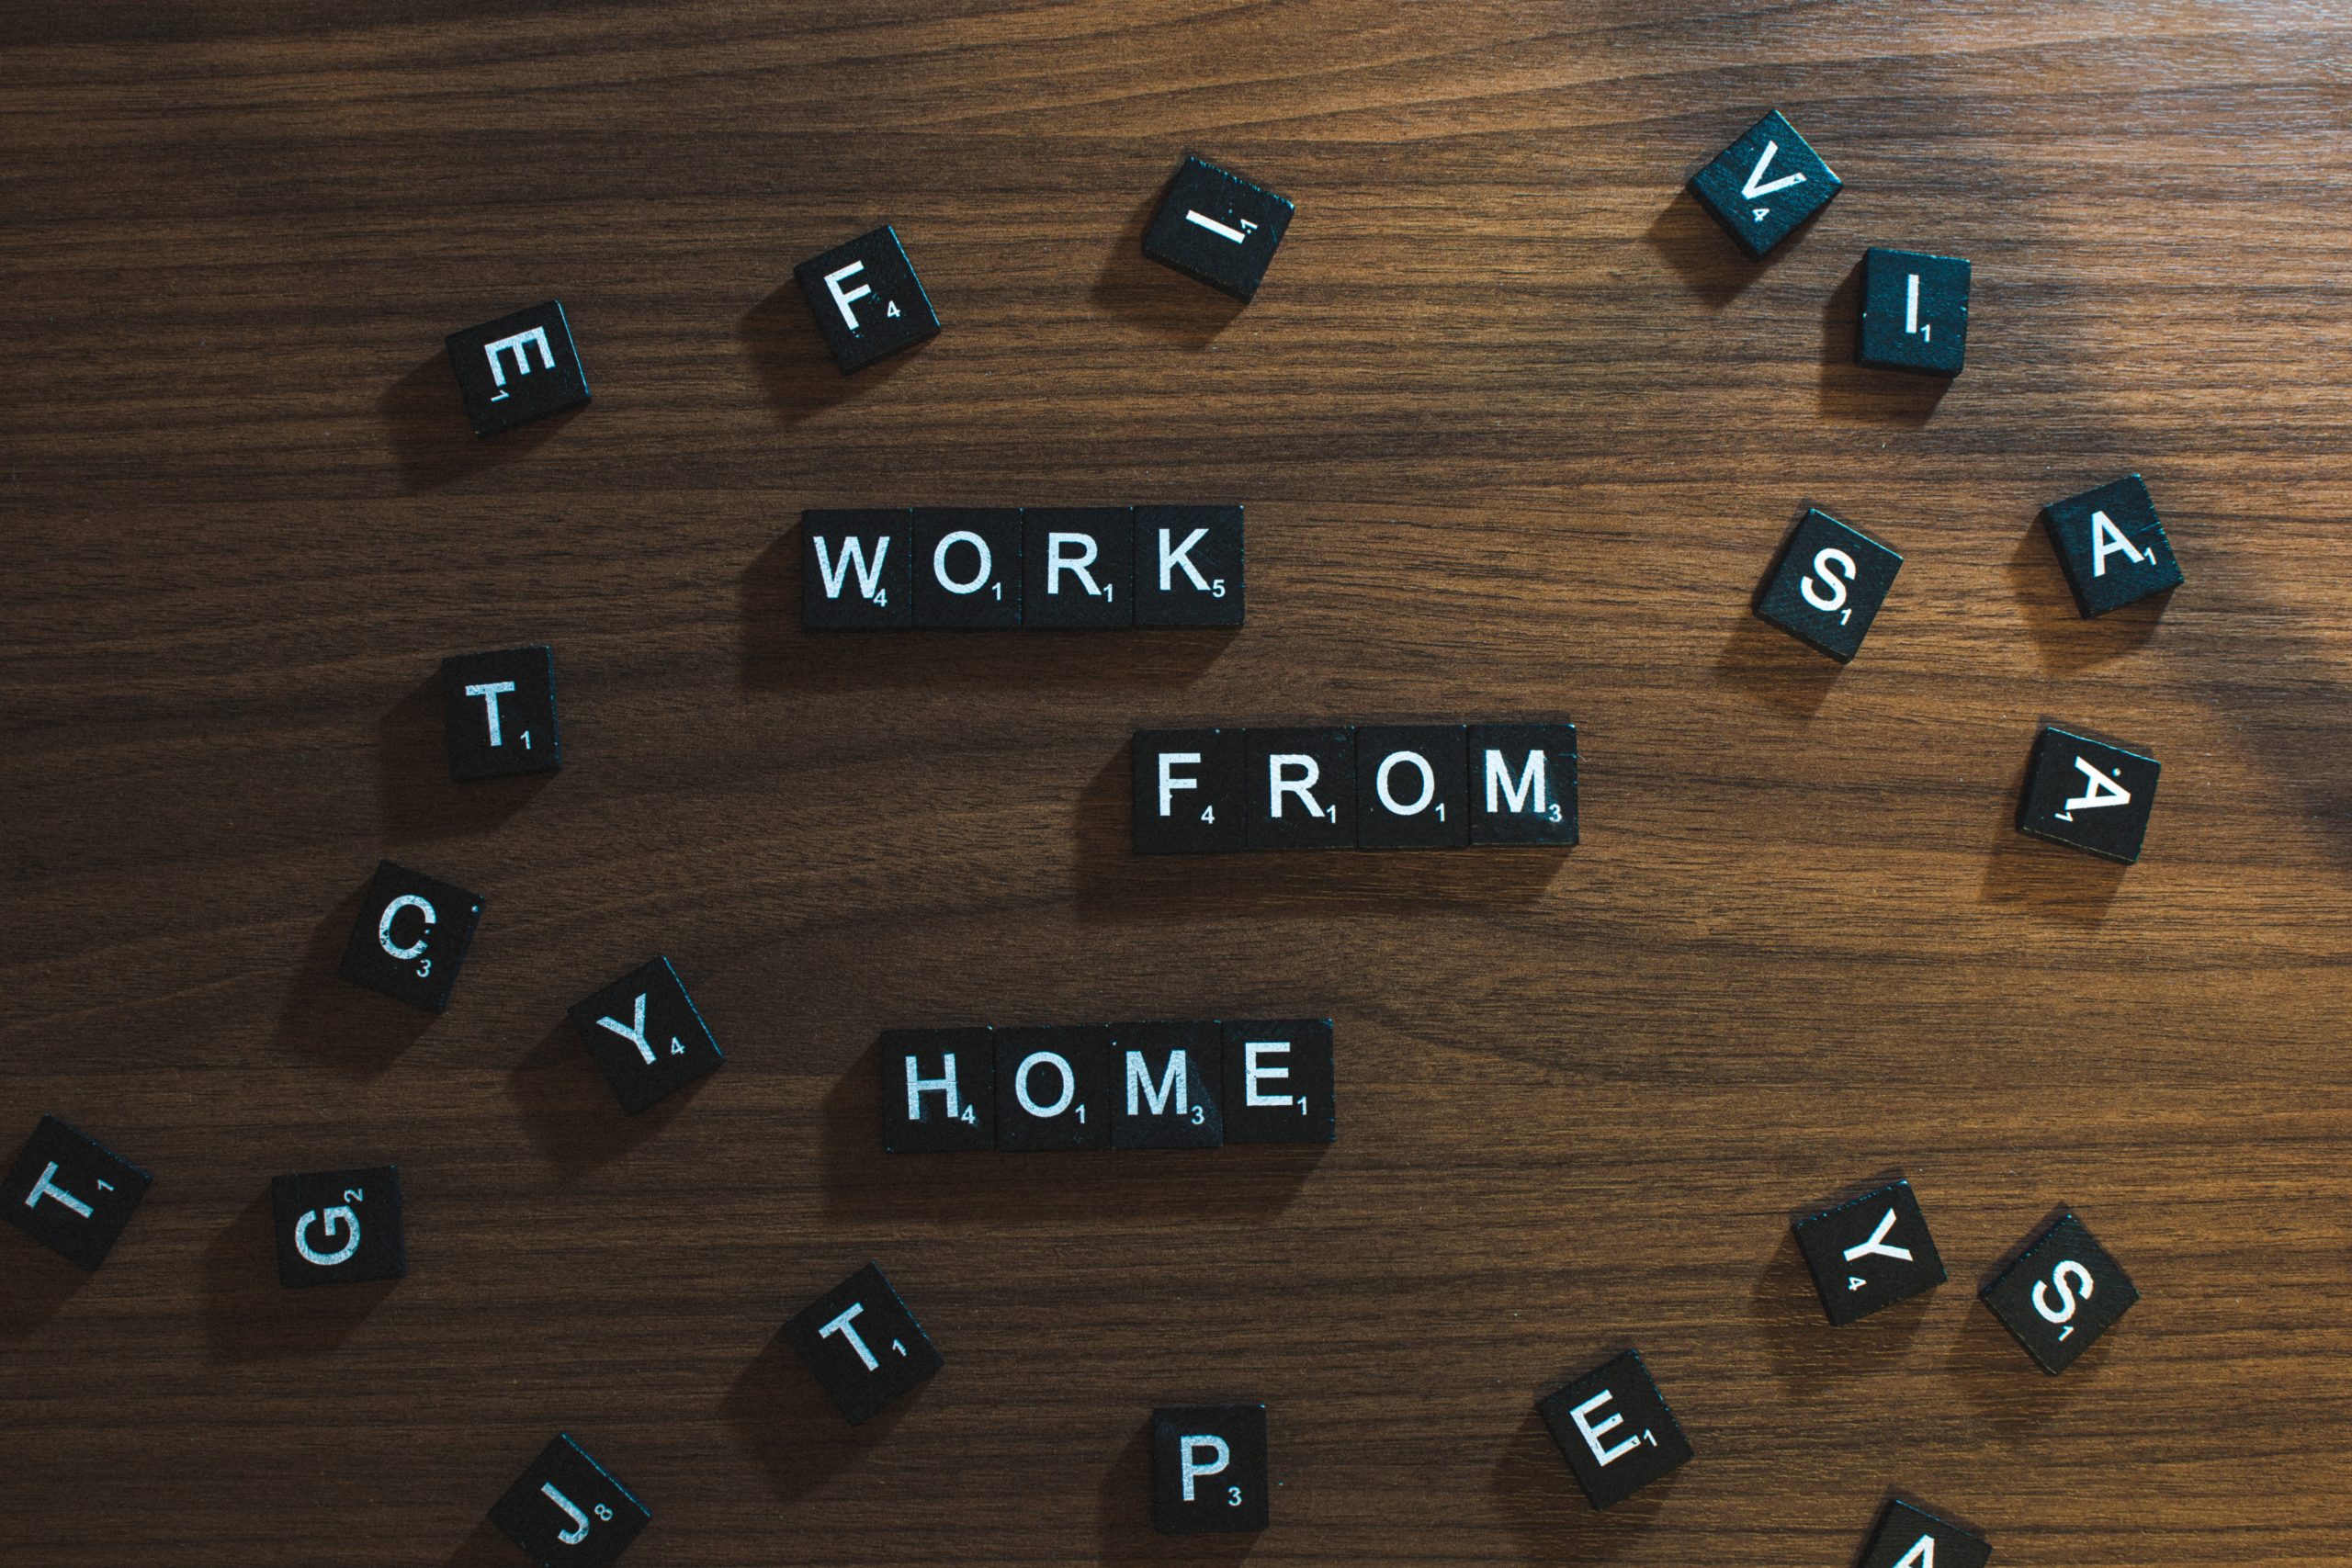 How to focus on work from home for better results